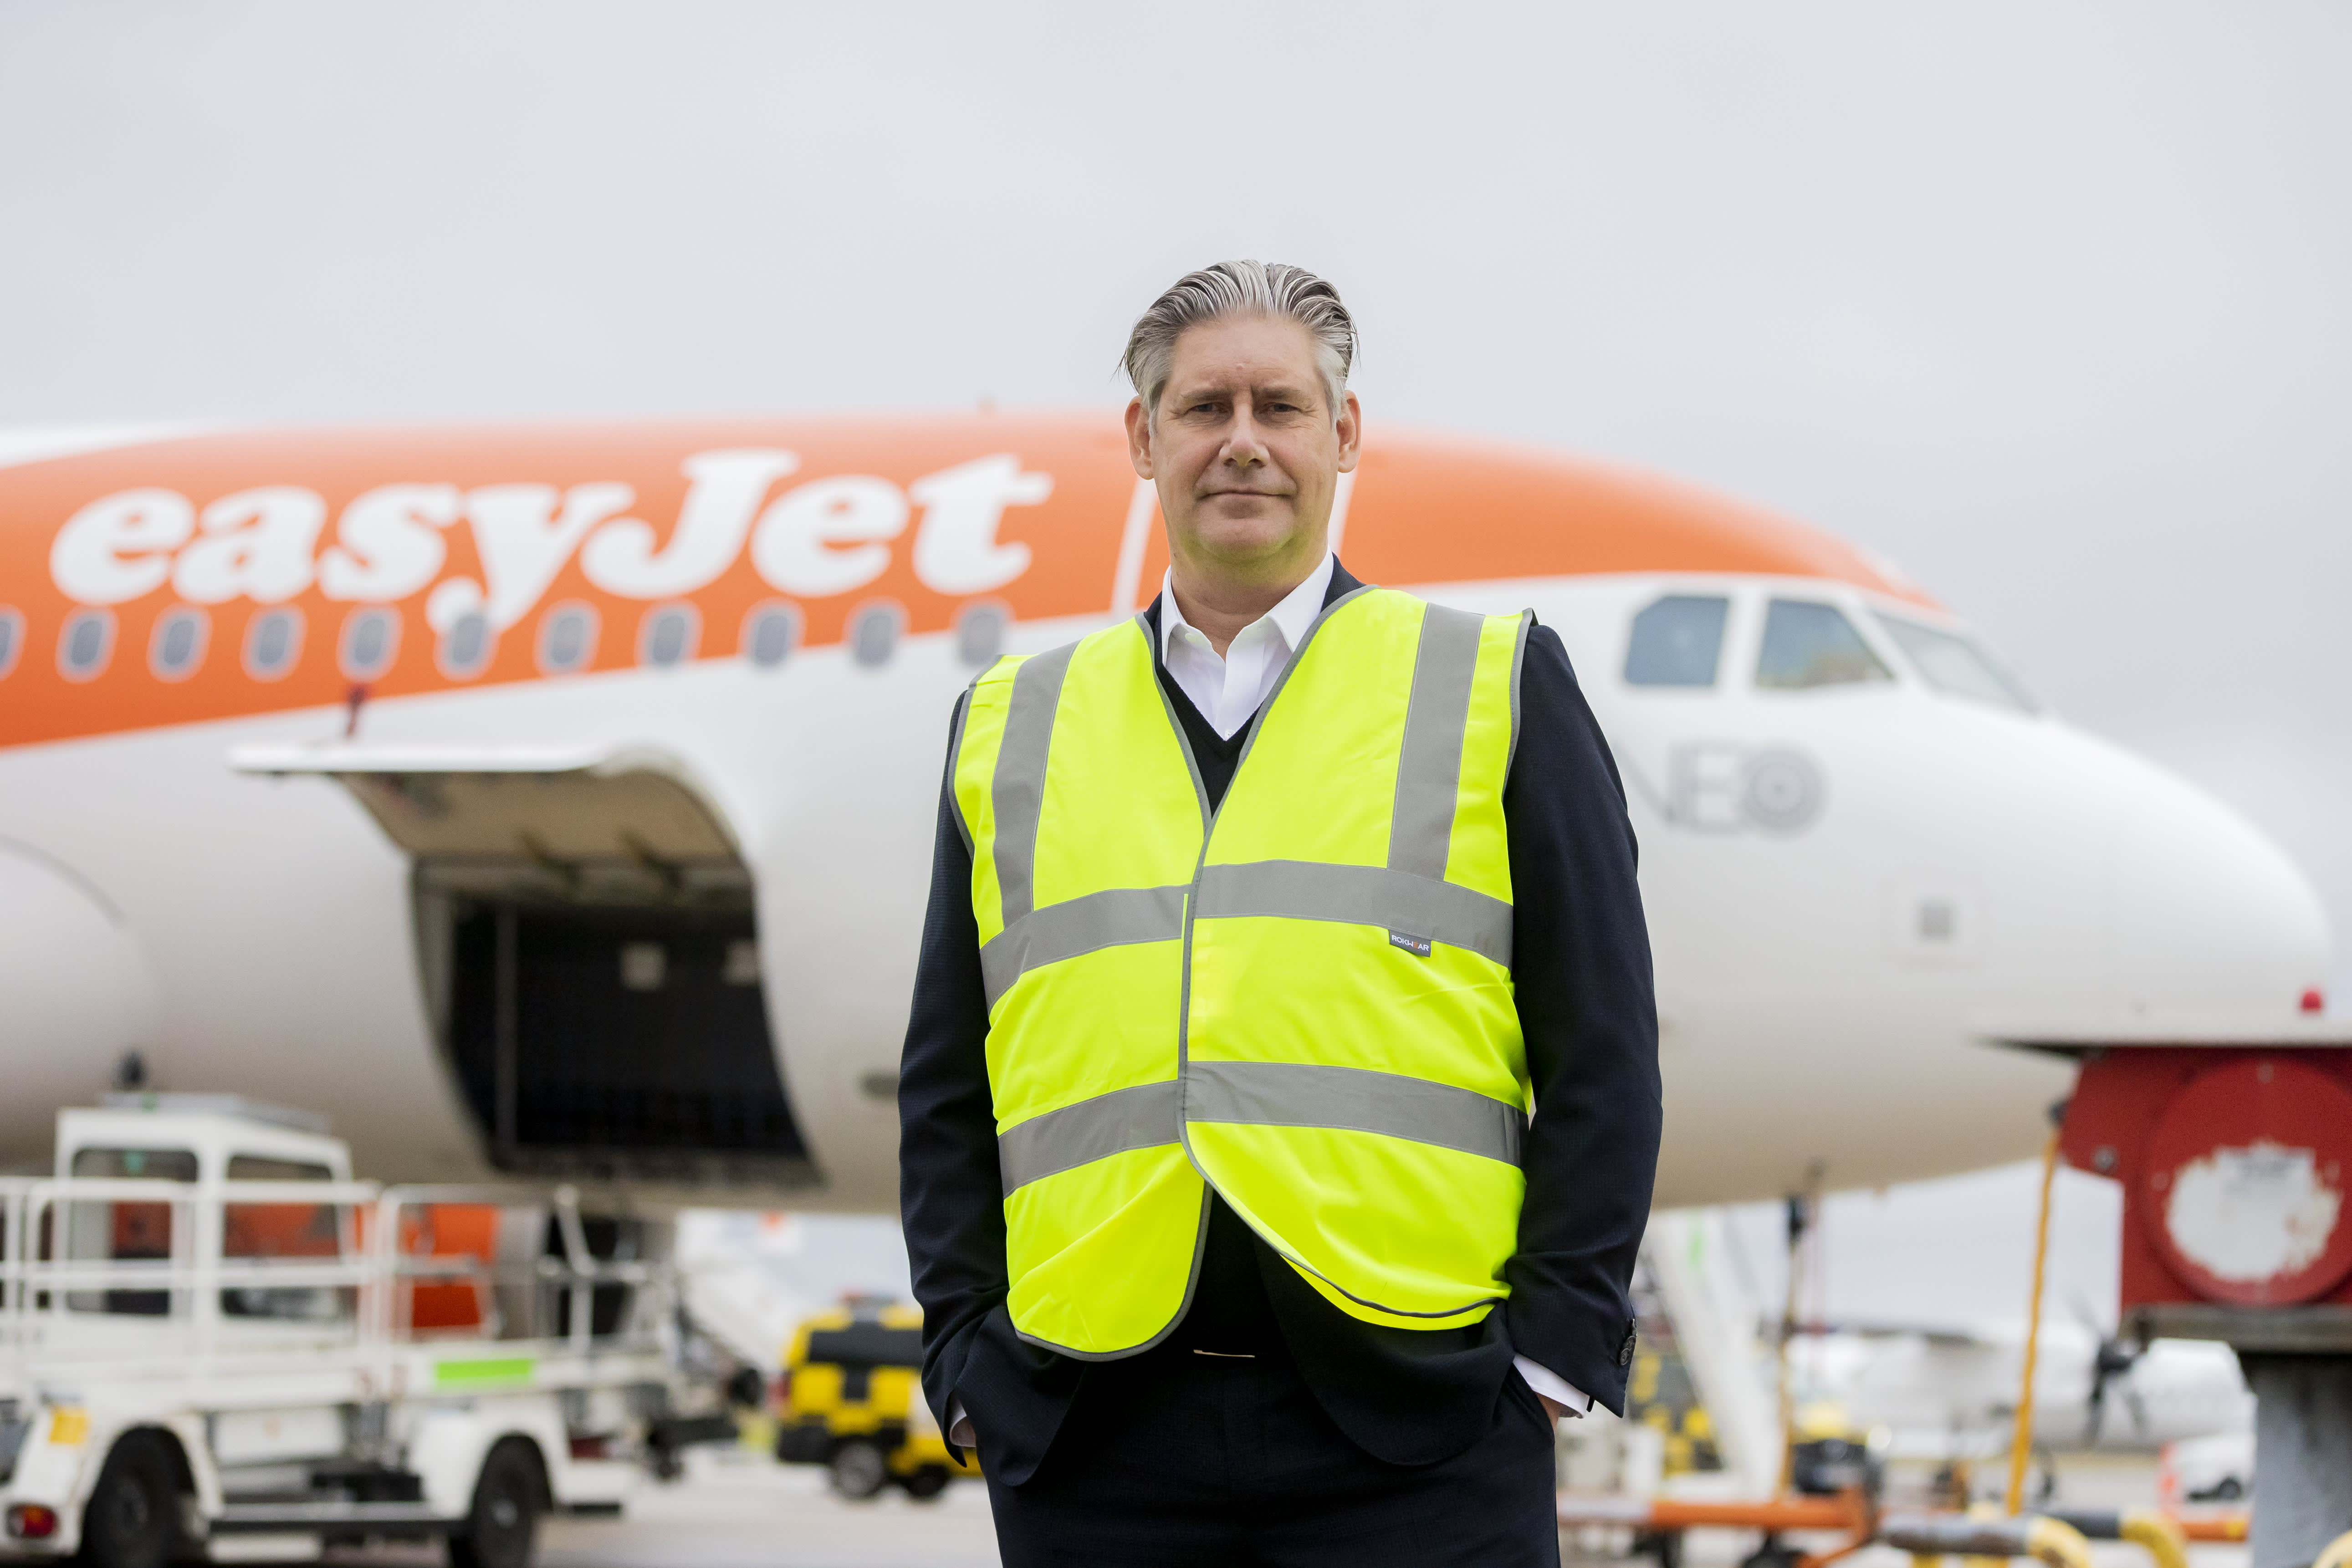 EasyJet CEO urges U.K. to even further relieve European travel limits in ‘safe way’